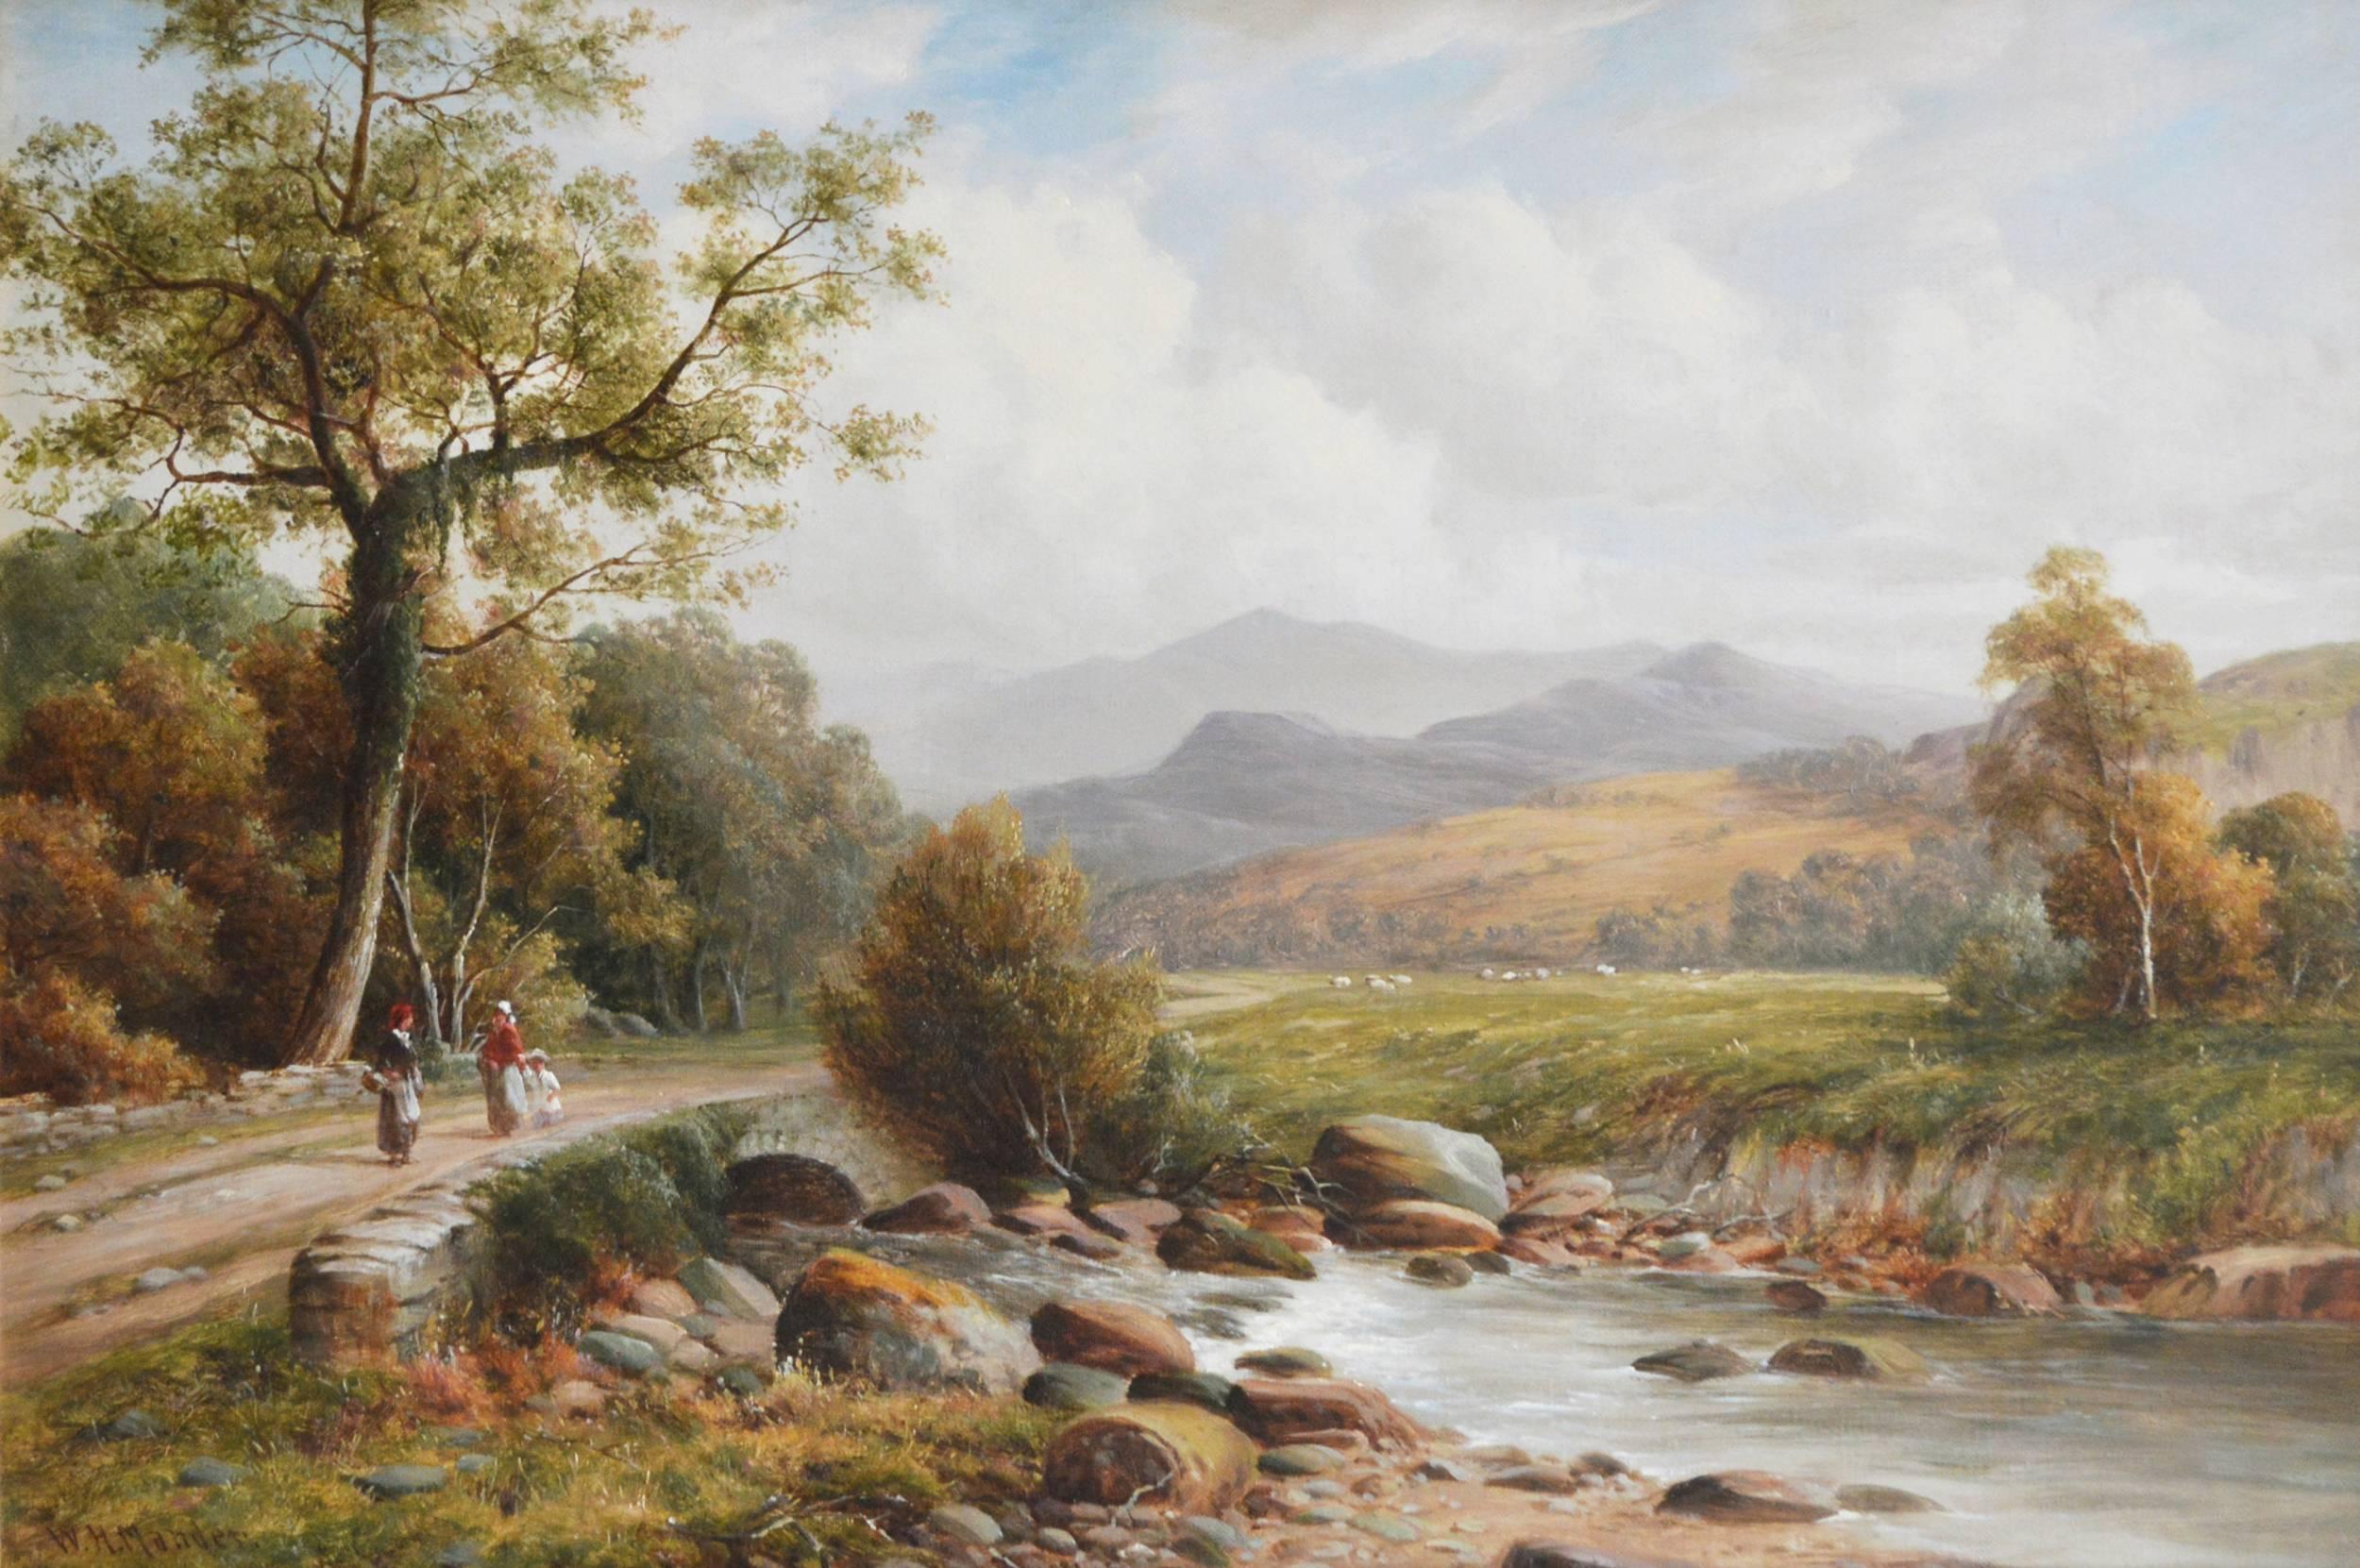 In the Mawddach Valley, North Wales, oil on canvas - Painting by William Henry Mander